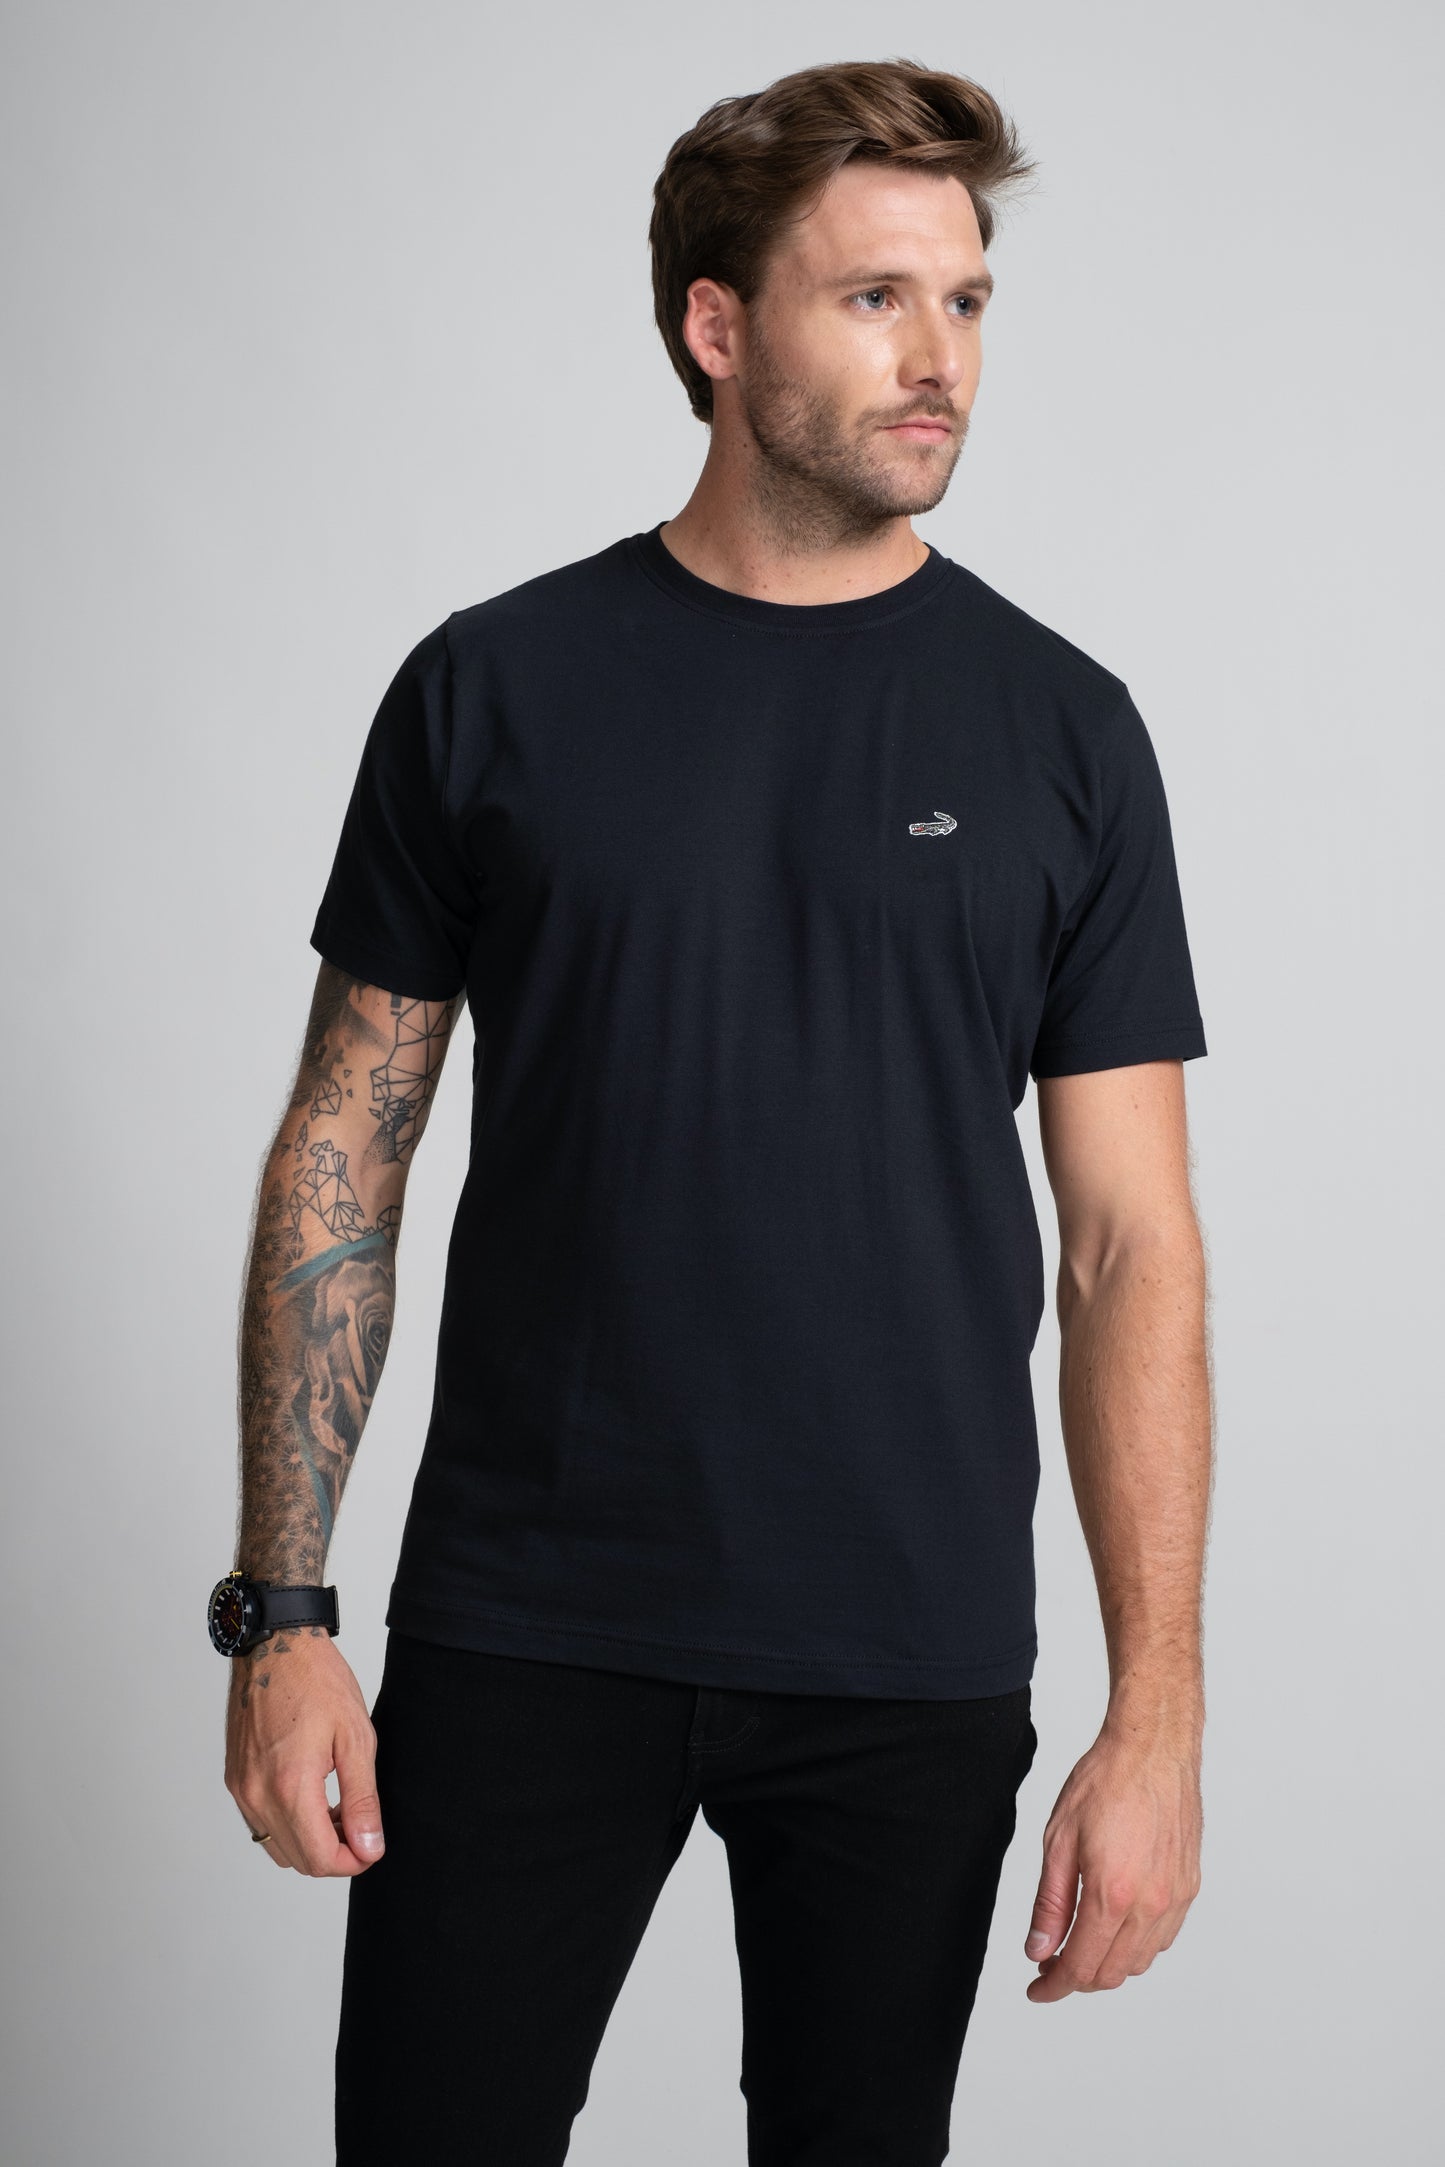 Classic Fit Short sleeves-CasualCrew Neck - Black Inck